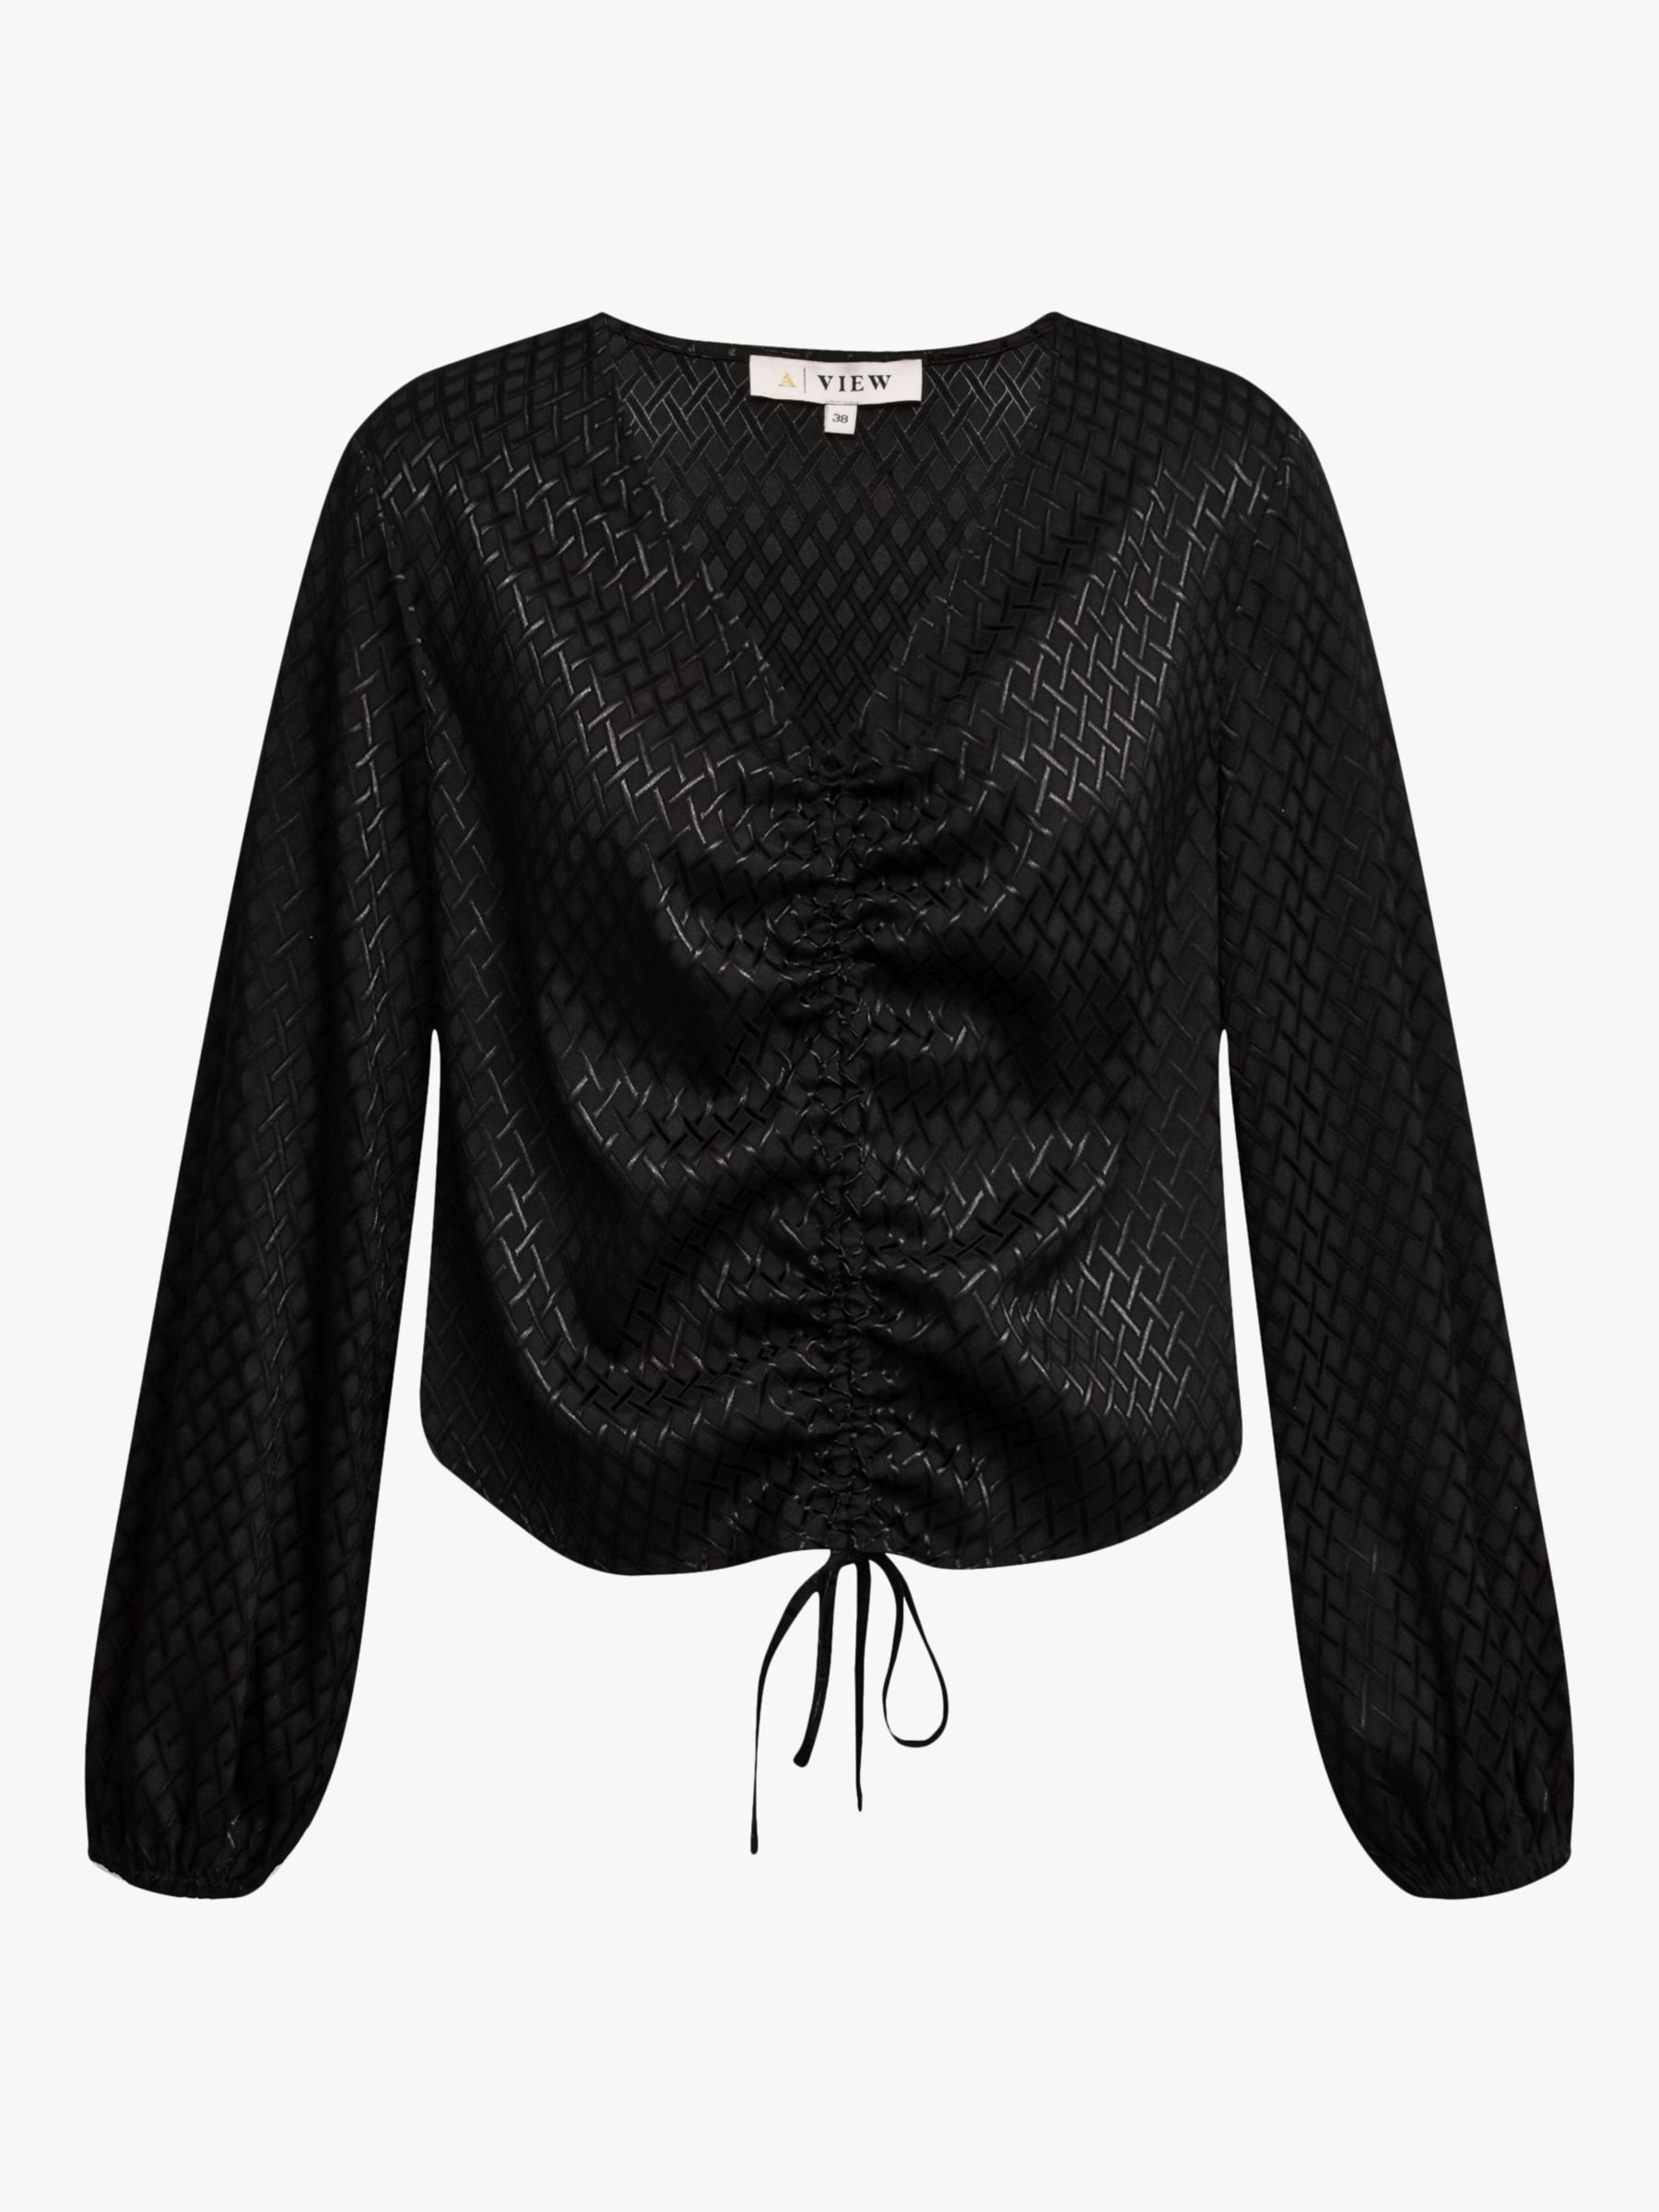 A-VIEW Enitta Long Sleeve Blouse, Black at John Lewis & Partners